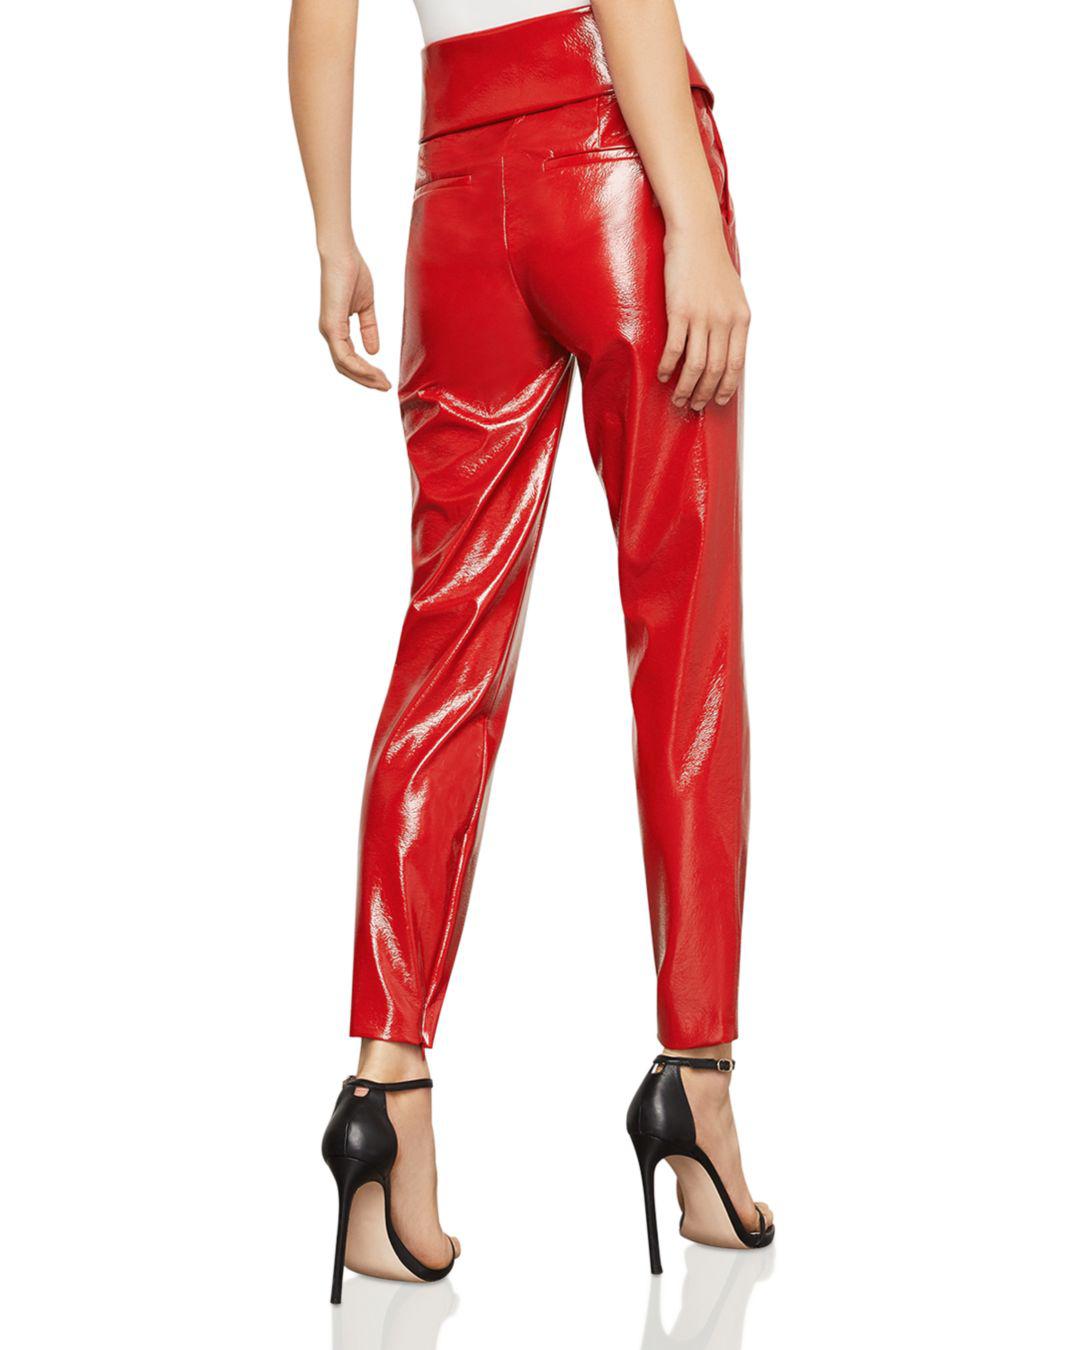 BCBGMAXAZRIA Faux Patent Leather Pants in Venetian Red (Red) - Lyst